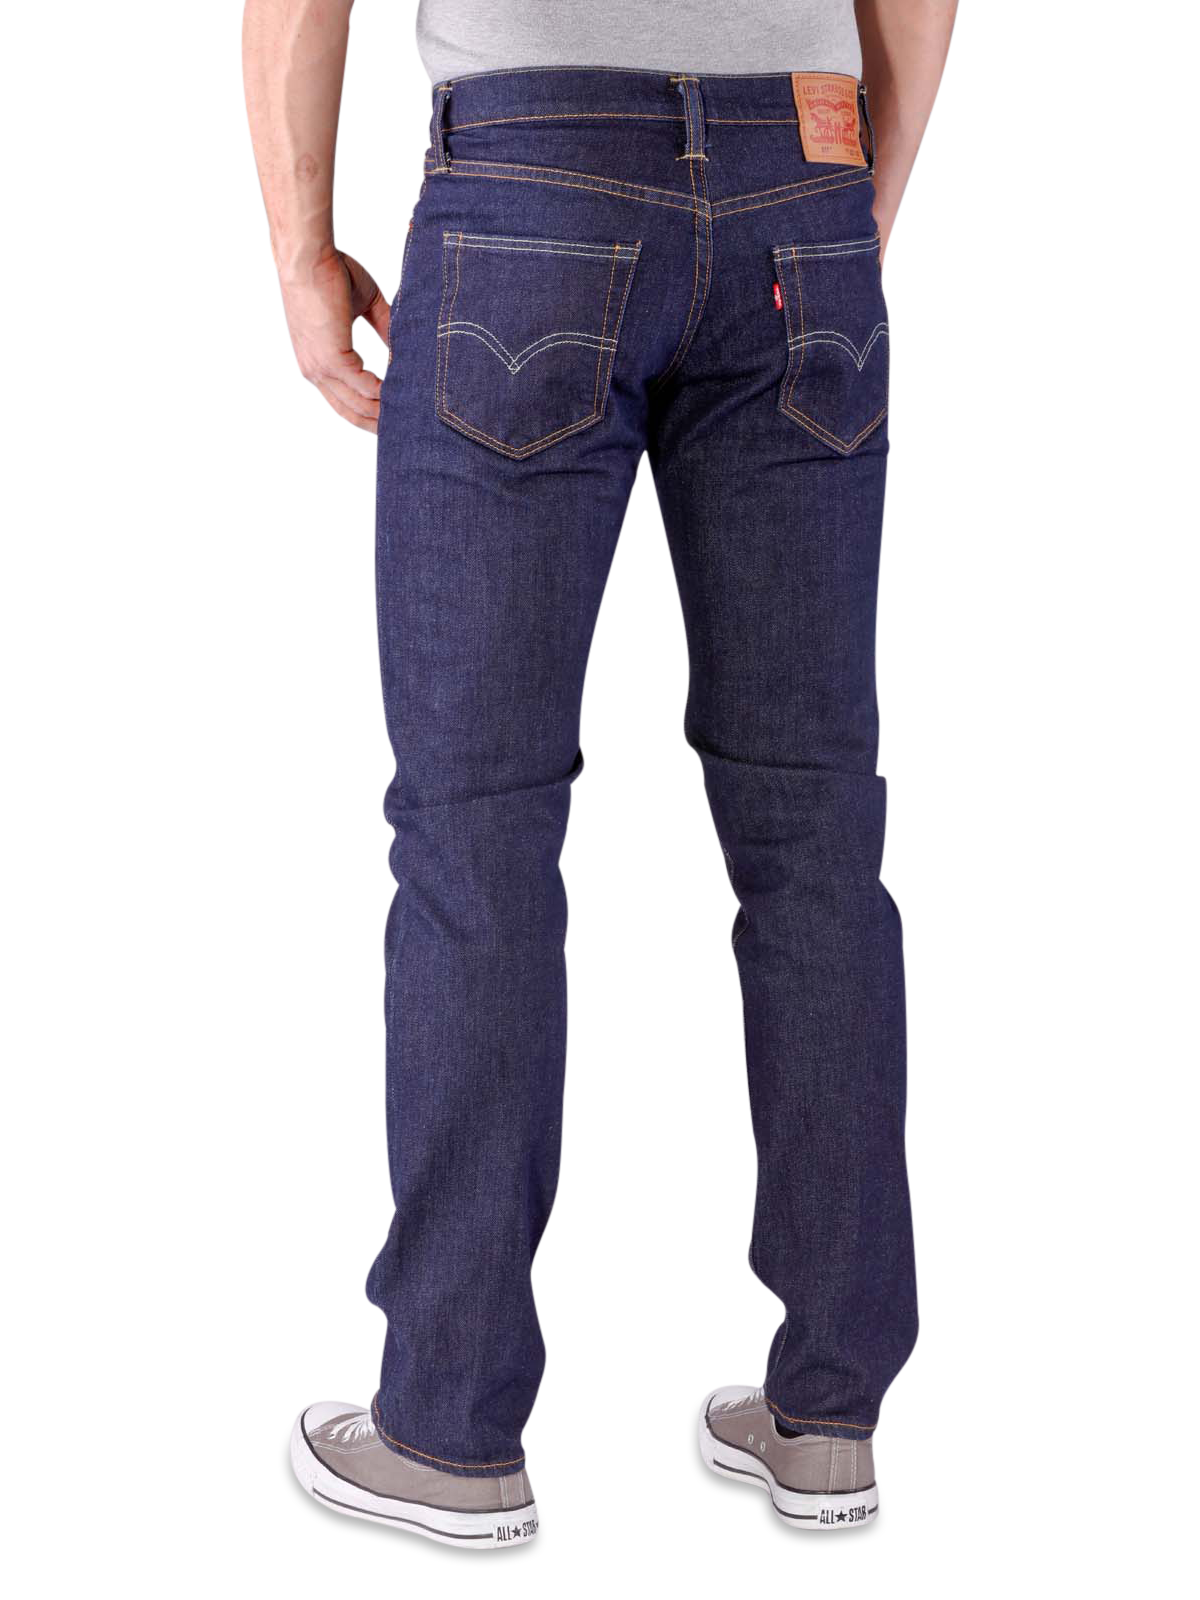 Levis 511 Slim Jeans rock cod  free shipping  JEANSCH